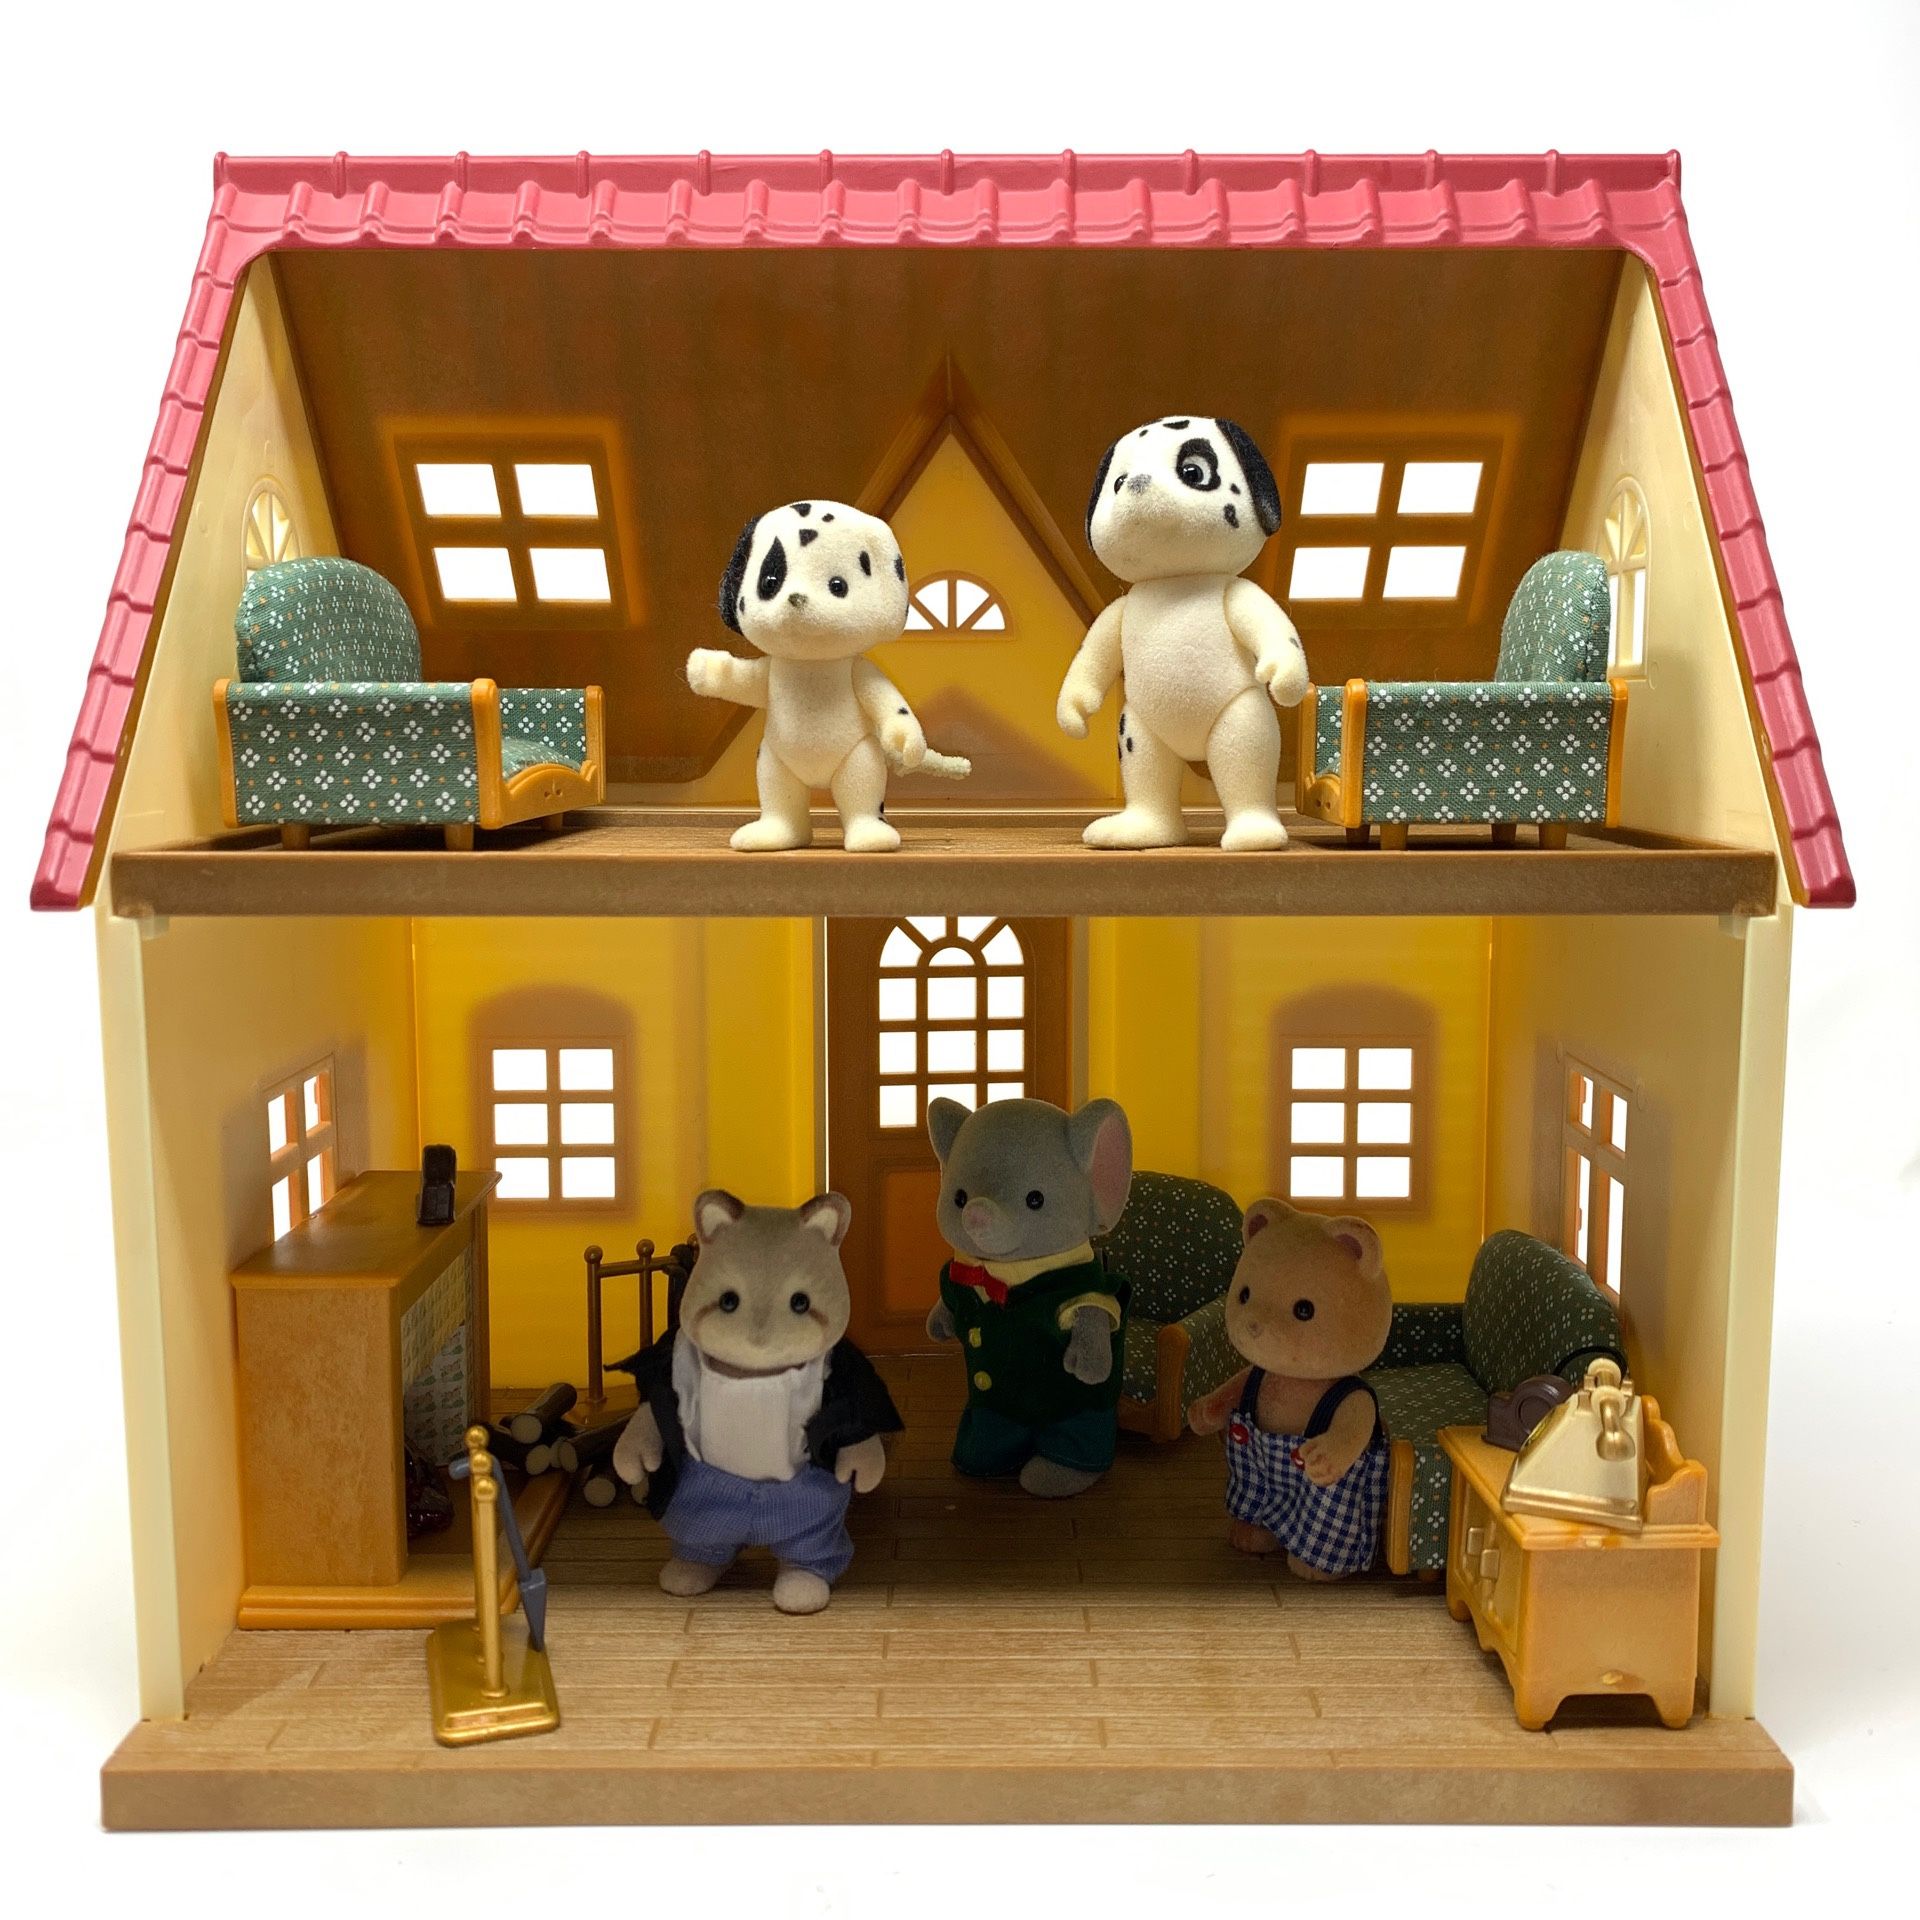 Calico critter cozy cottage